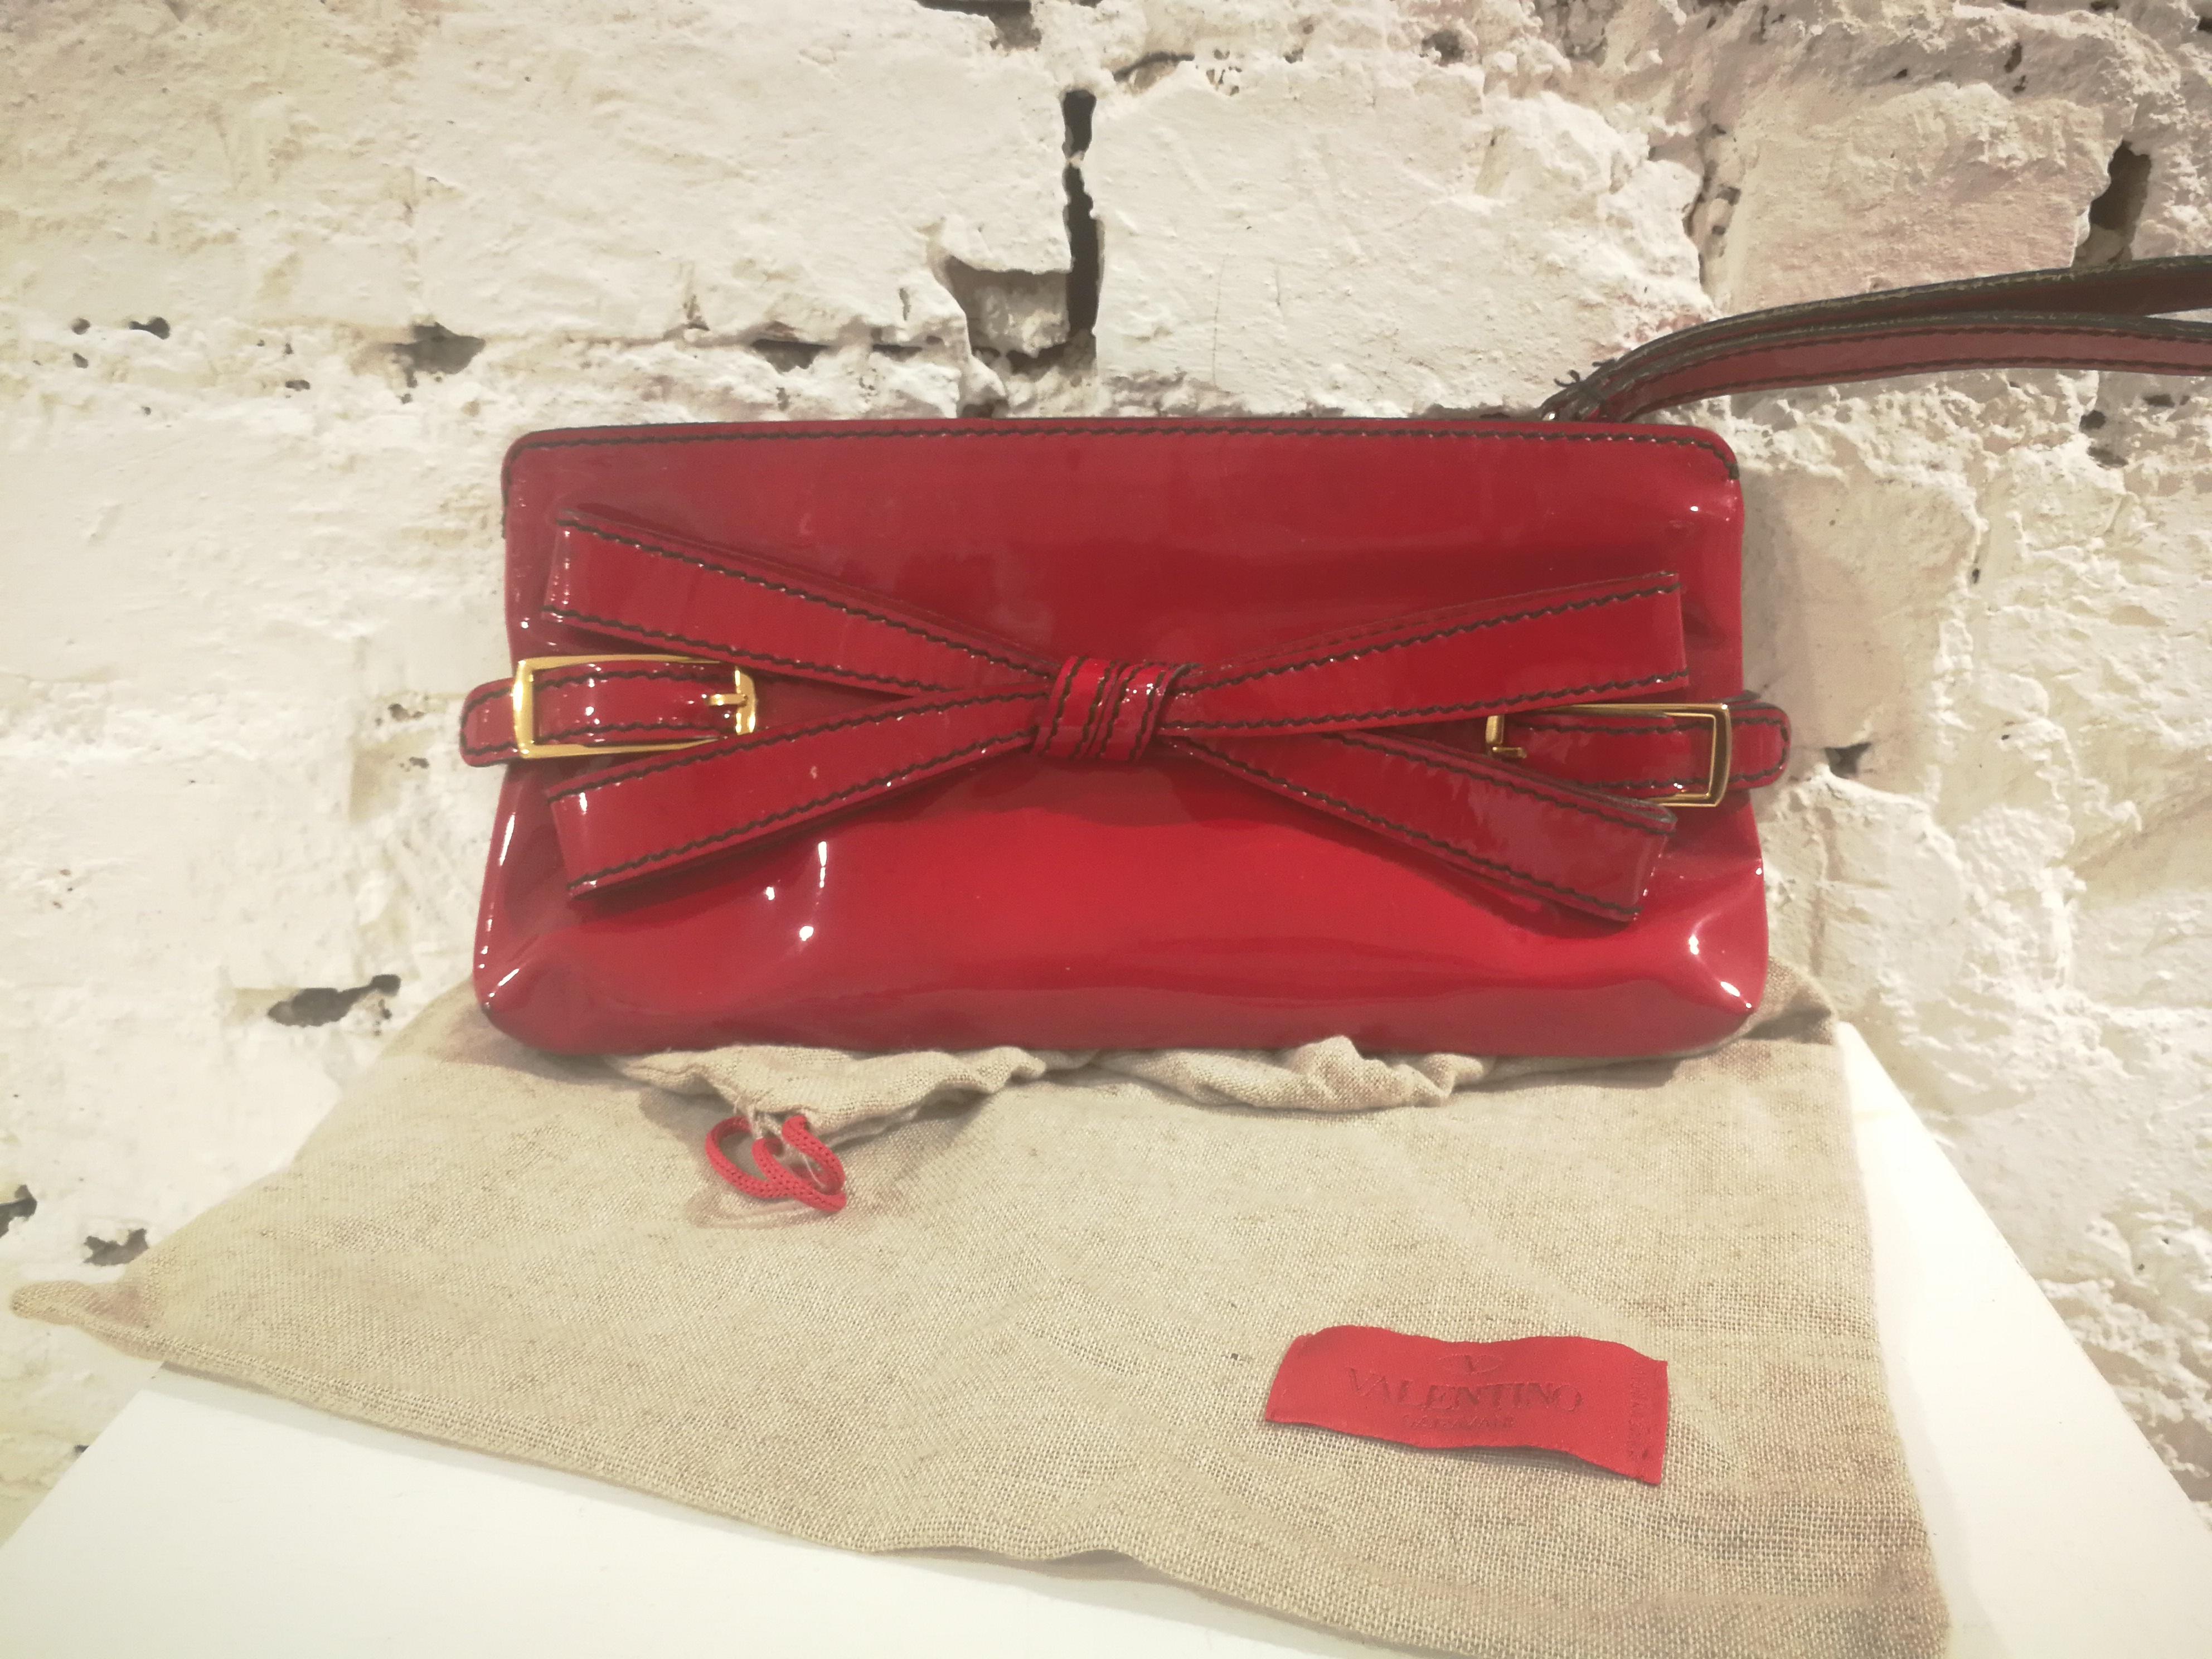 Valentino Red Patent Leather Handle Bag / Clutch

Some signs on the bag
check pics carefully
measurements= 25 cm x h 14 cm